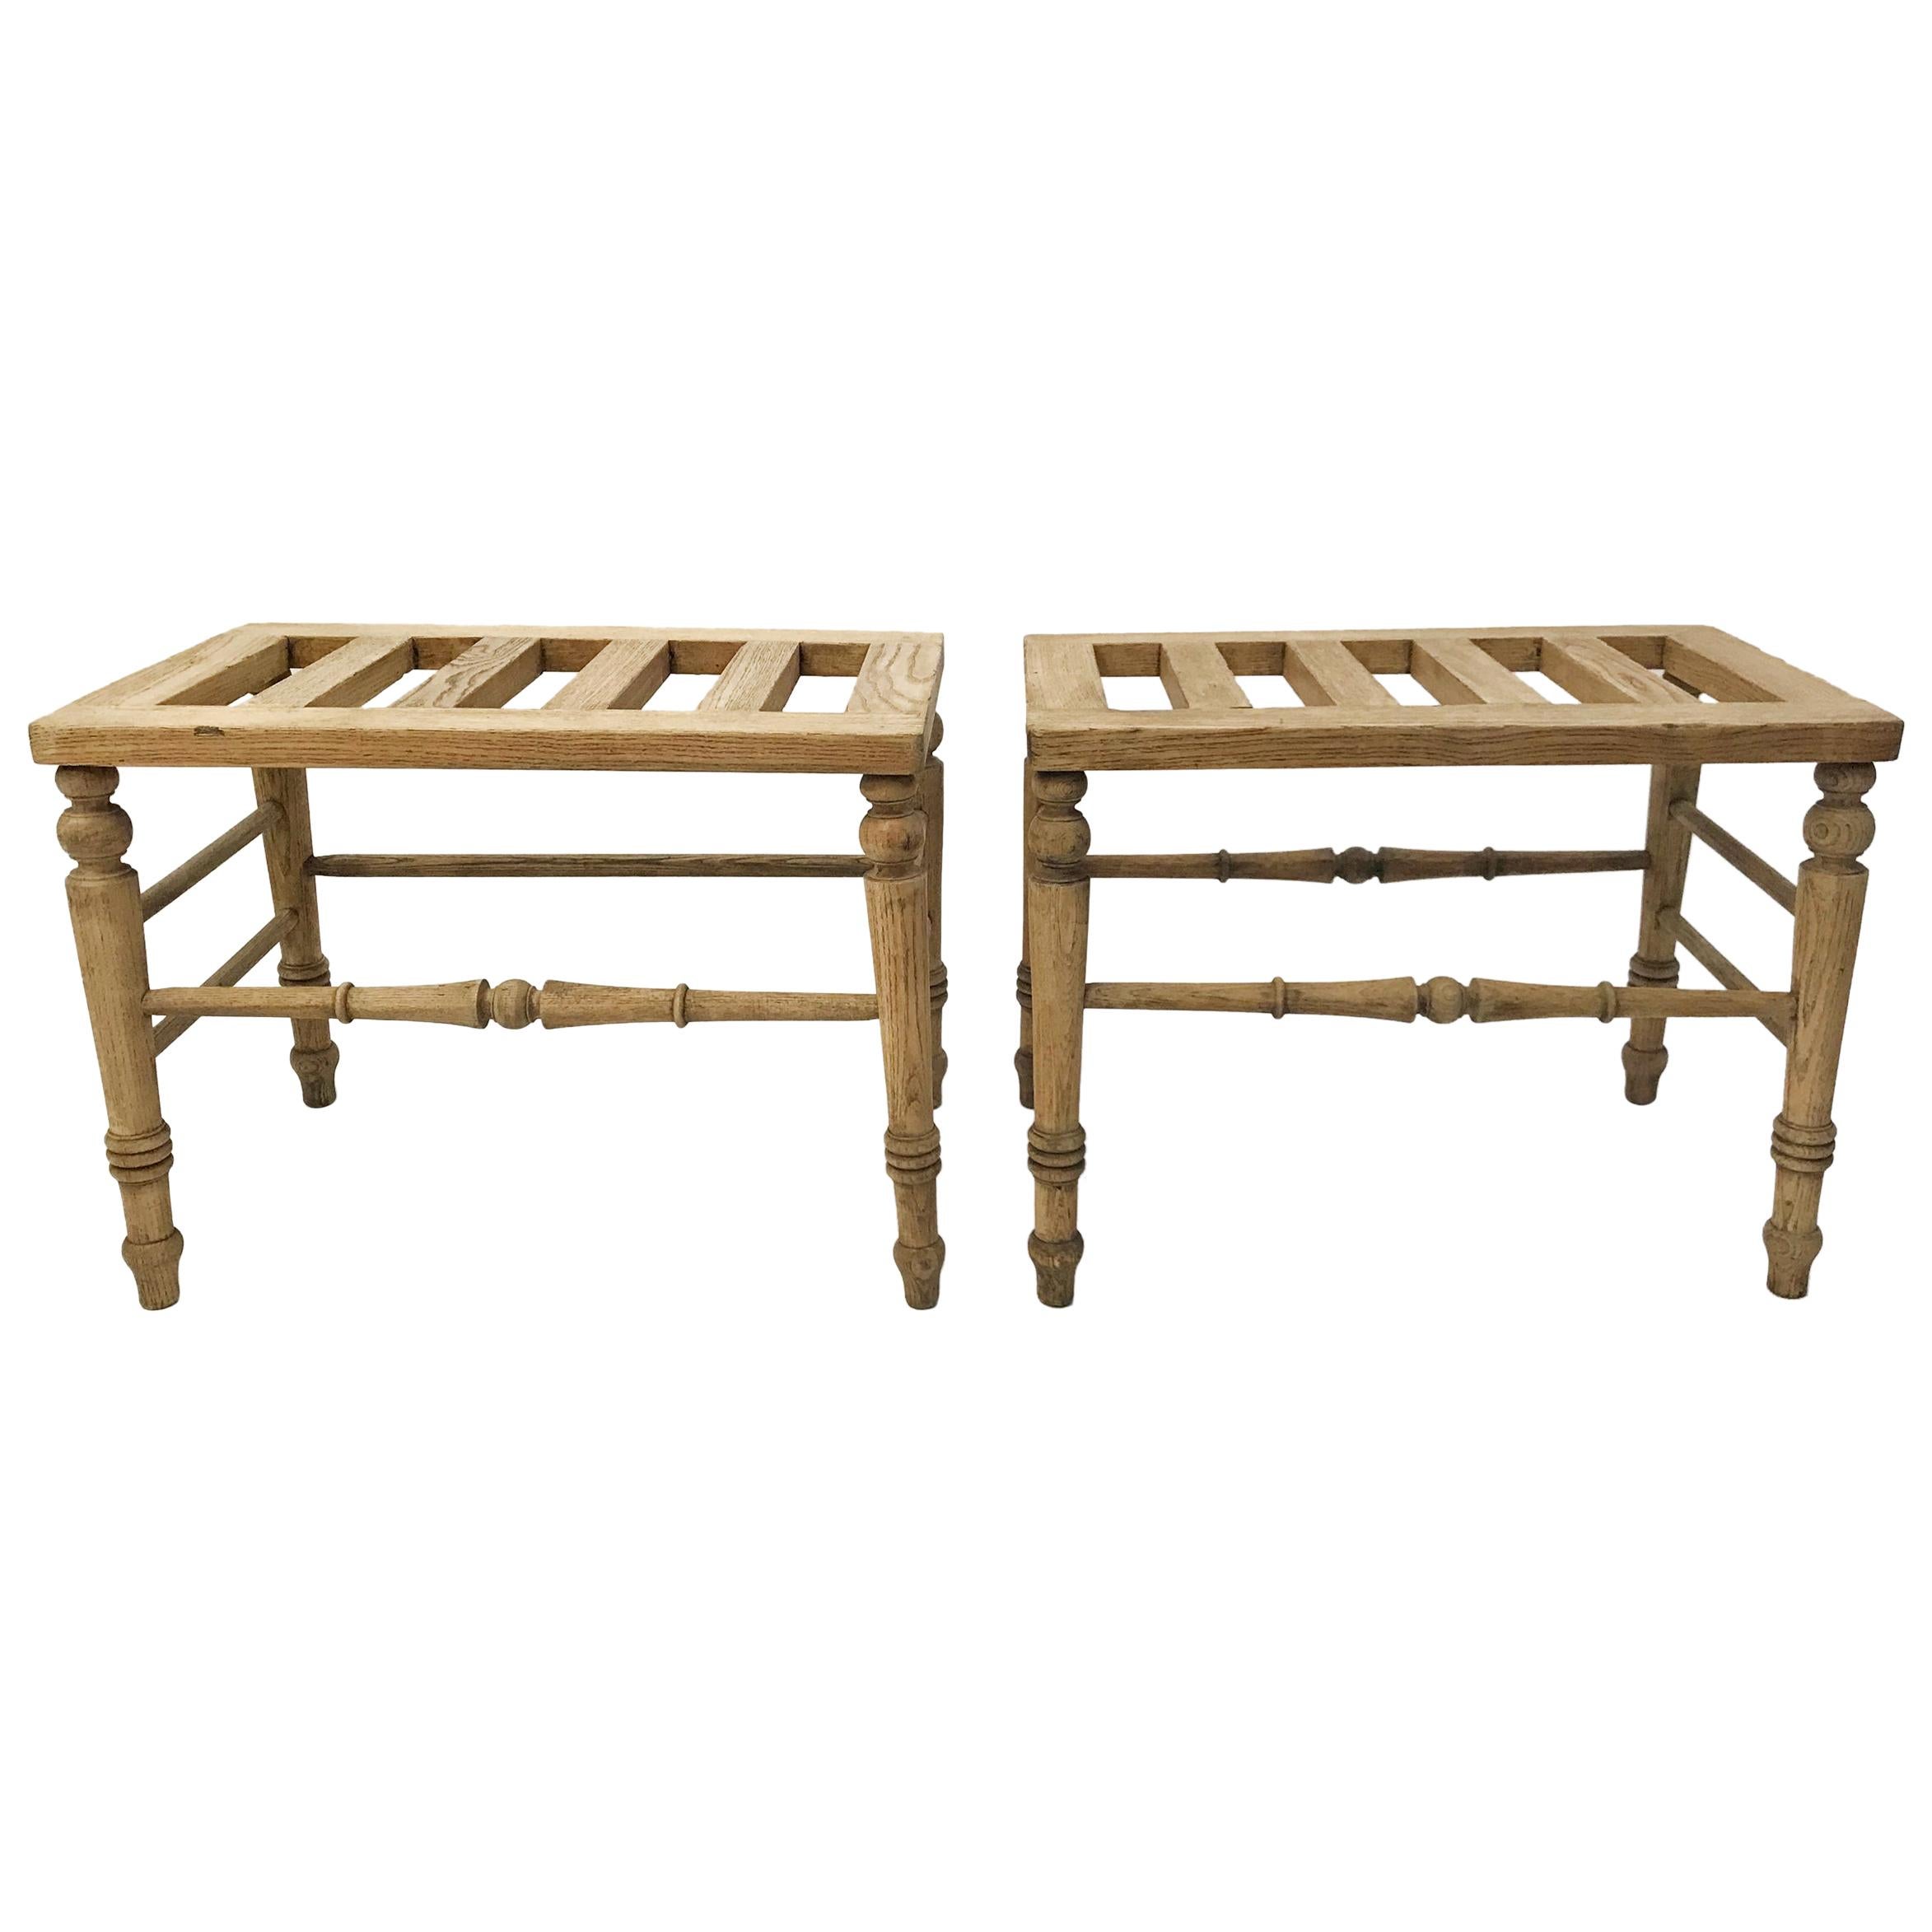 ENGLISH BLEACHED OAK Pair of Luggage Racks, Late 19th Century